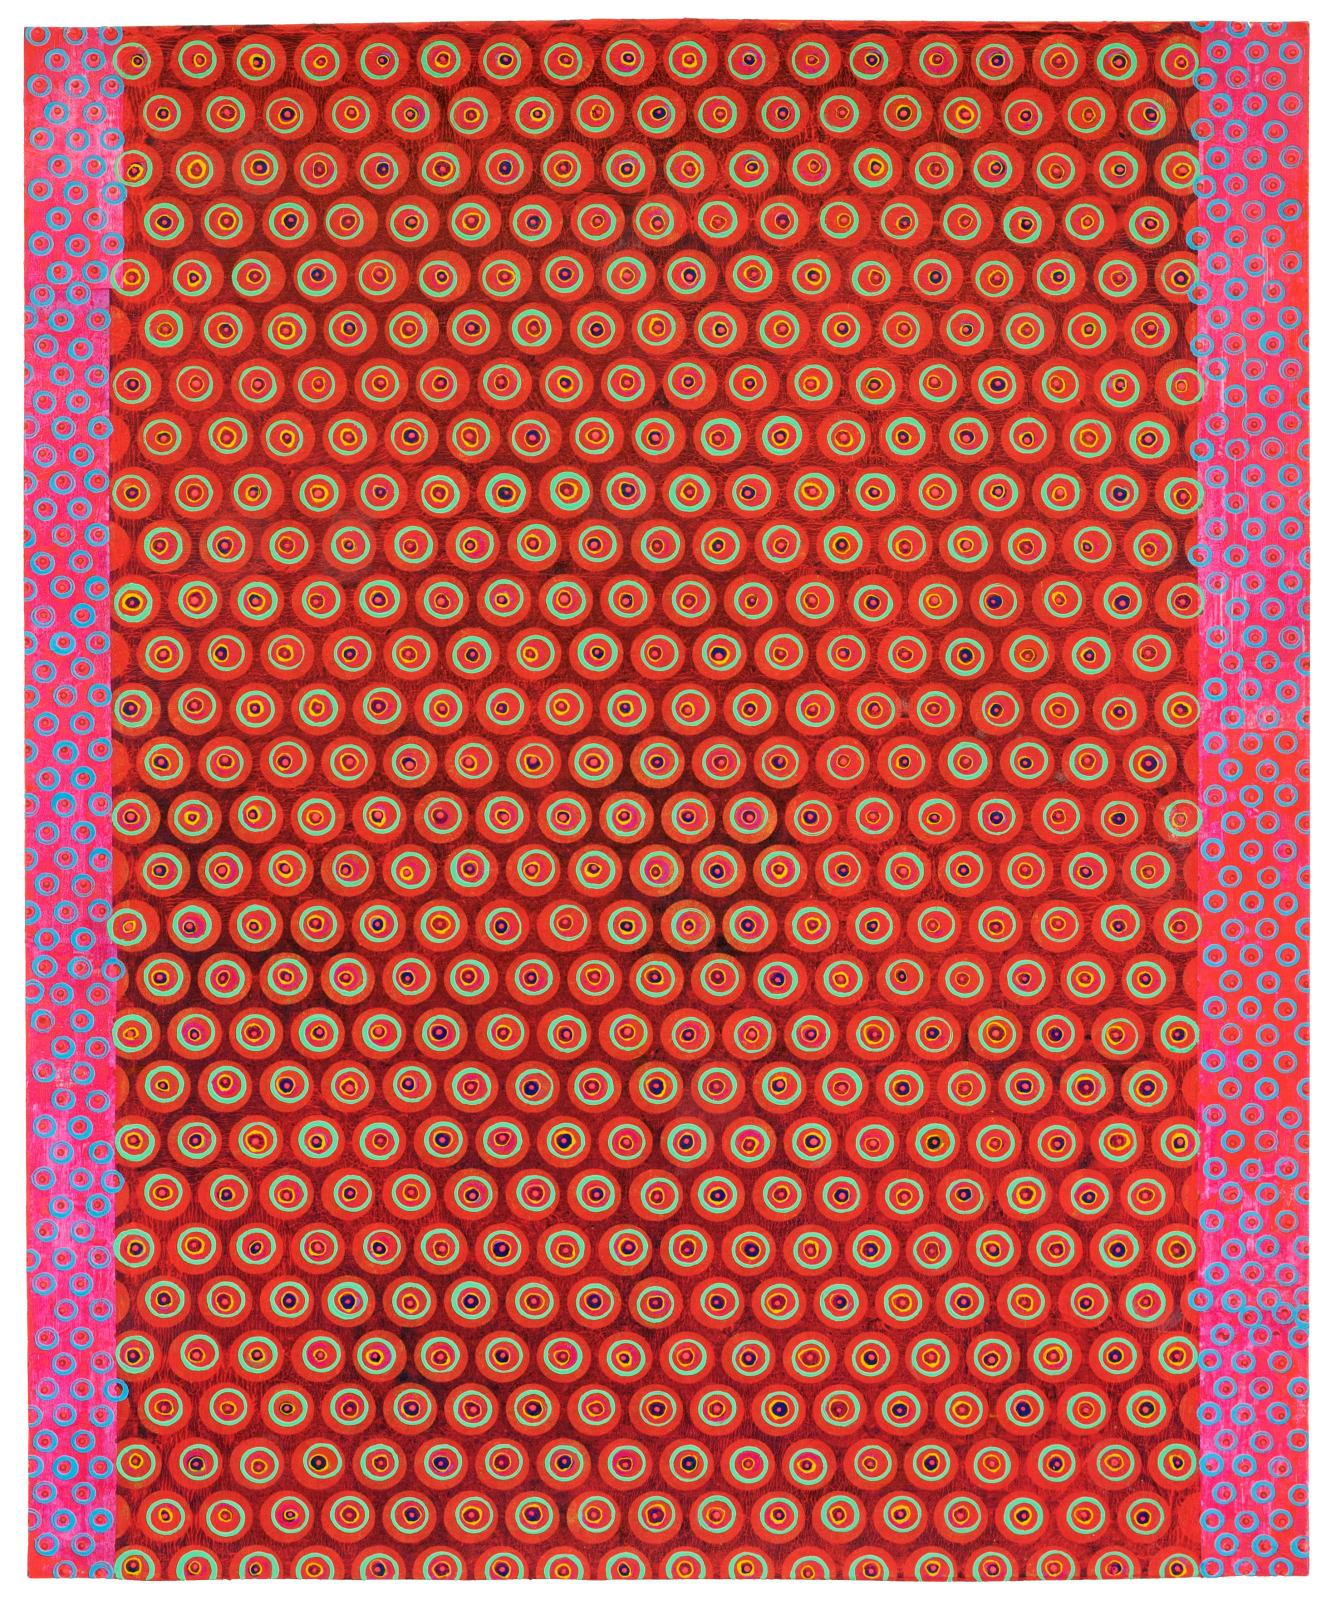 Diane Ayott
Rosie Rounds, 2020
mixed media on paper
30 x 22 in.
(ay100)

Diane Ayott's work is more about color and pattern than color and form, but the Boston-based artist is working her circles, dots and lines with structure and dimensionality.